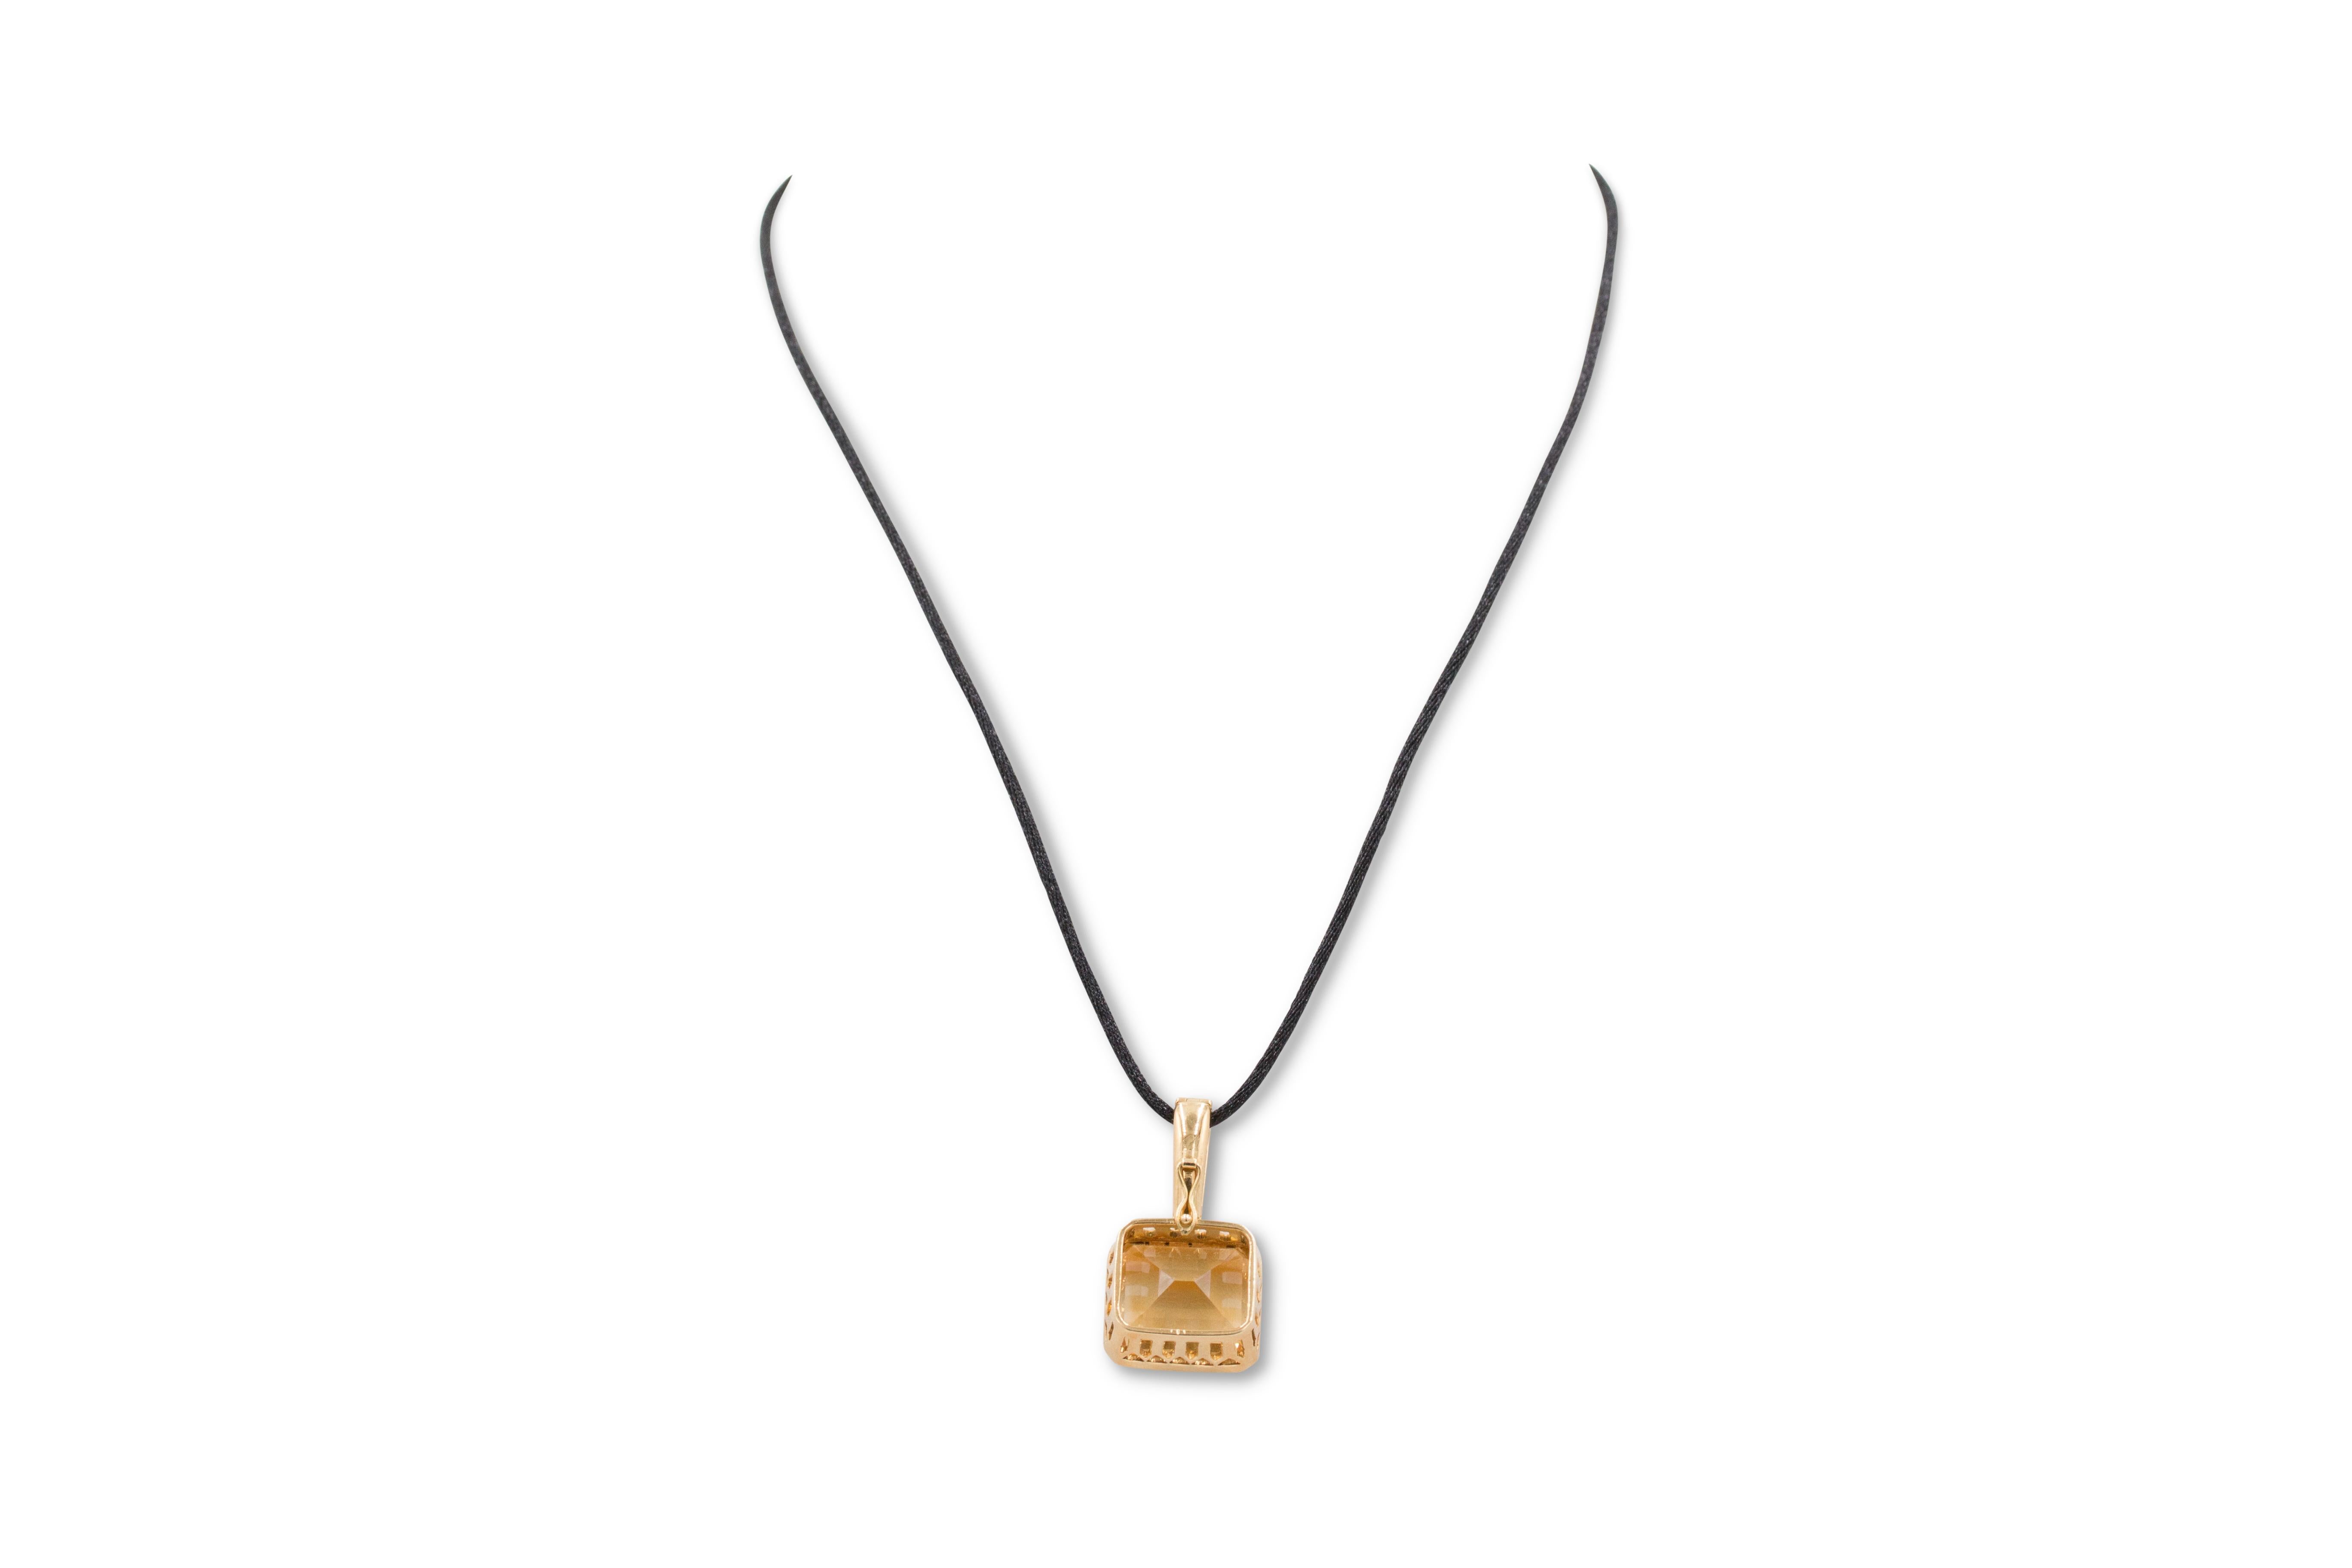 A lively rectangular step-cut citrine stone weighing an estimated 21 carats set in an 18 karat gold pendant. No markings or signatures present. The pendant hangs from a satin cord that is not original to this piece. Not presented with the original